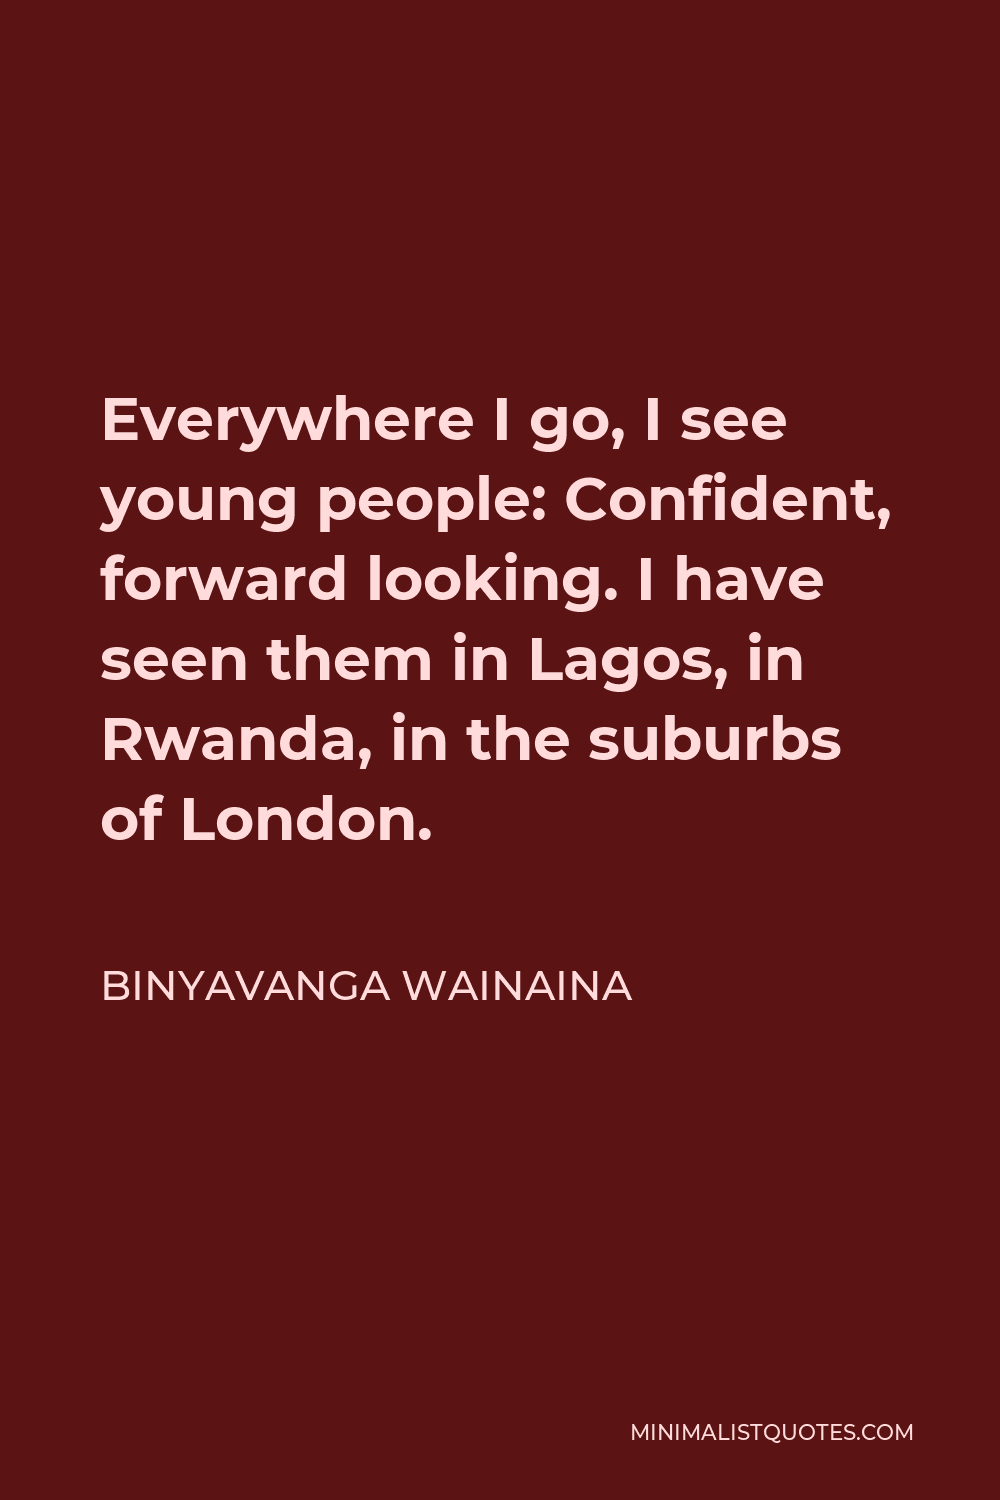 Binyavanga Wainaina Quote - Everywhere I go, I see young people: Confident, forward looking. I have seen them in Lagos, in Rwanda, in the suburbs of London.